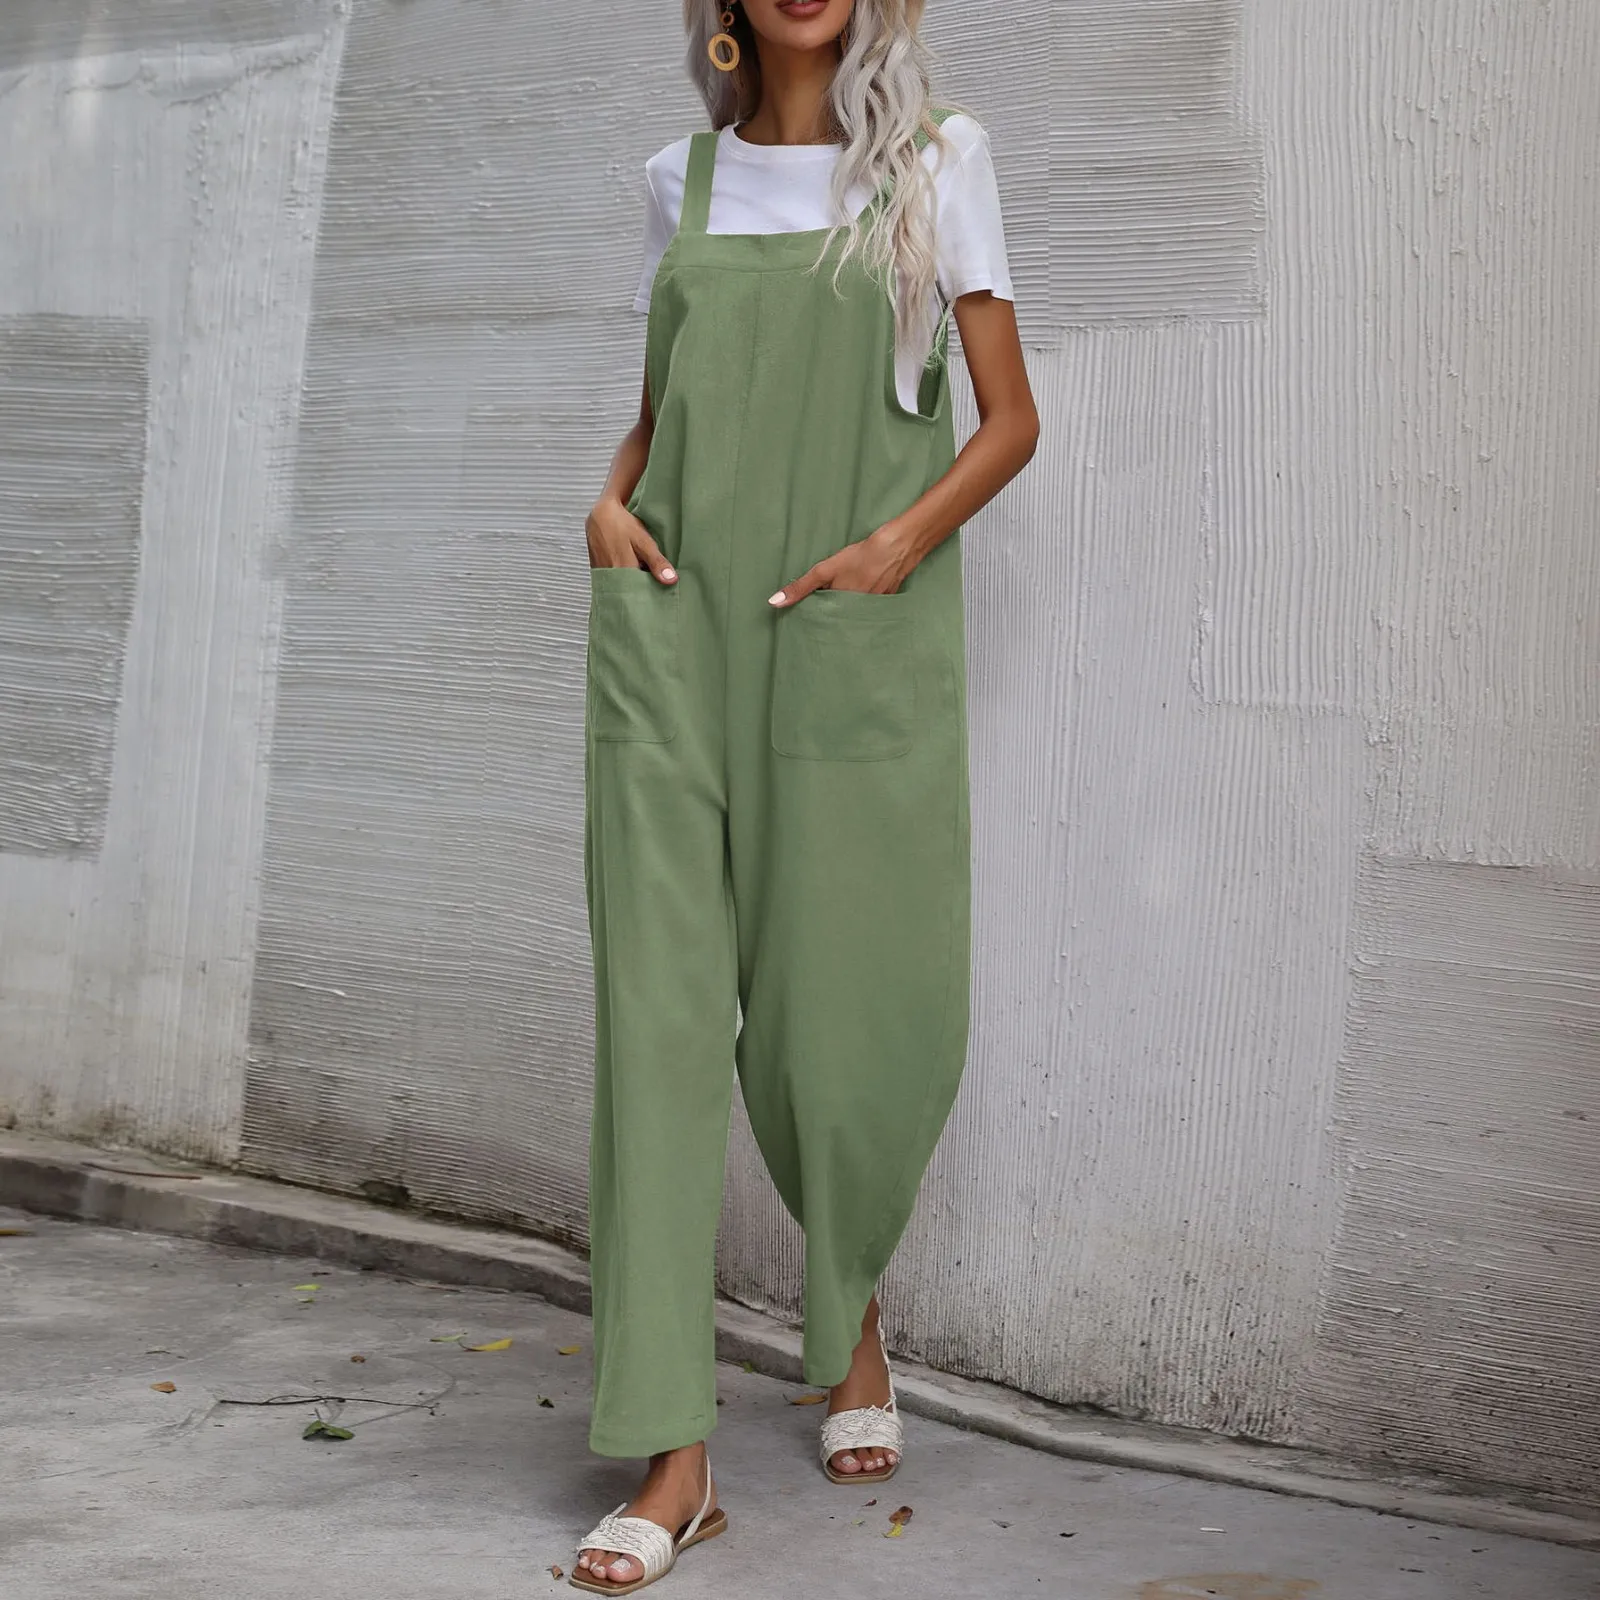 

Women's Solid Sleeveless Dungaree Casual Jumpsuit Overalls Bibs Loose Long Pants Back Button Loose Pocket Romper Plus Size